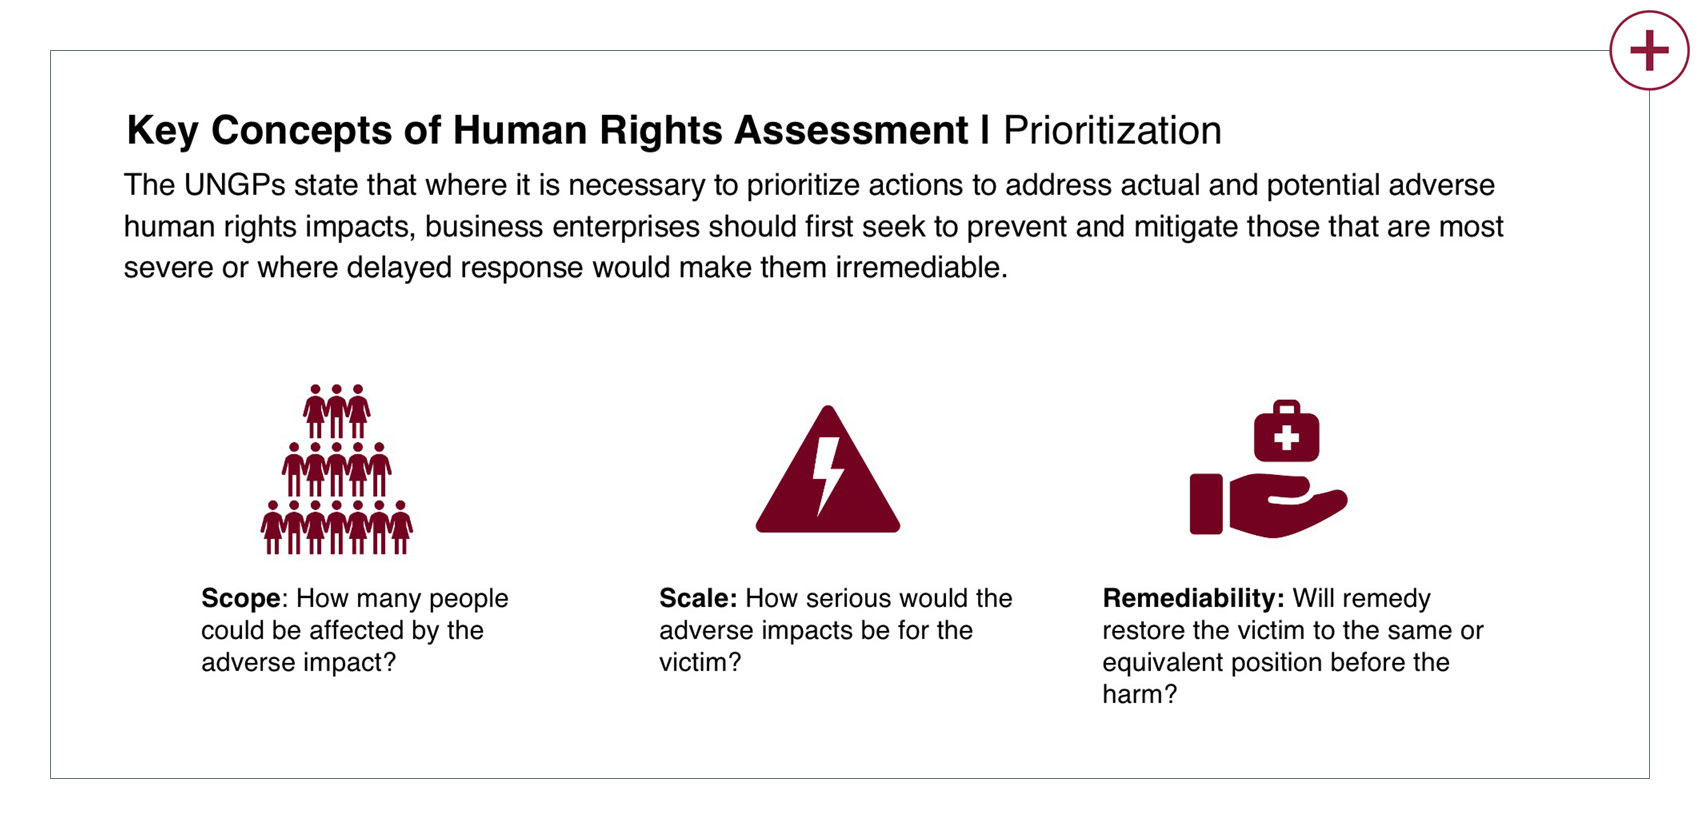 Key Concepts of Human Rights Assessment: Prioritization